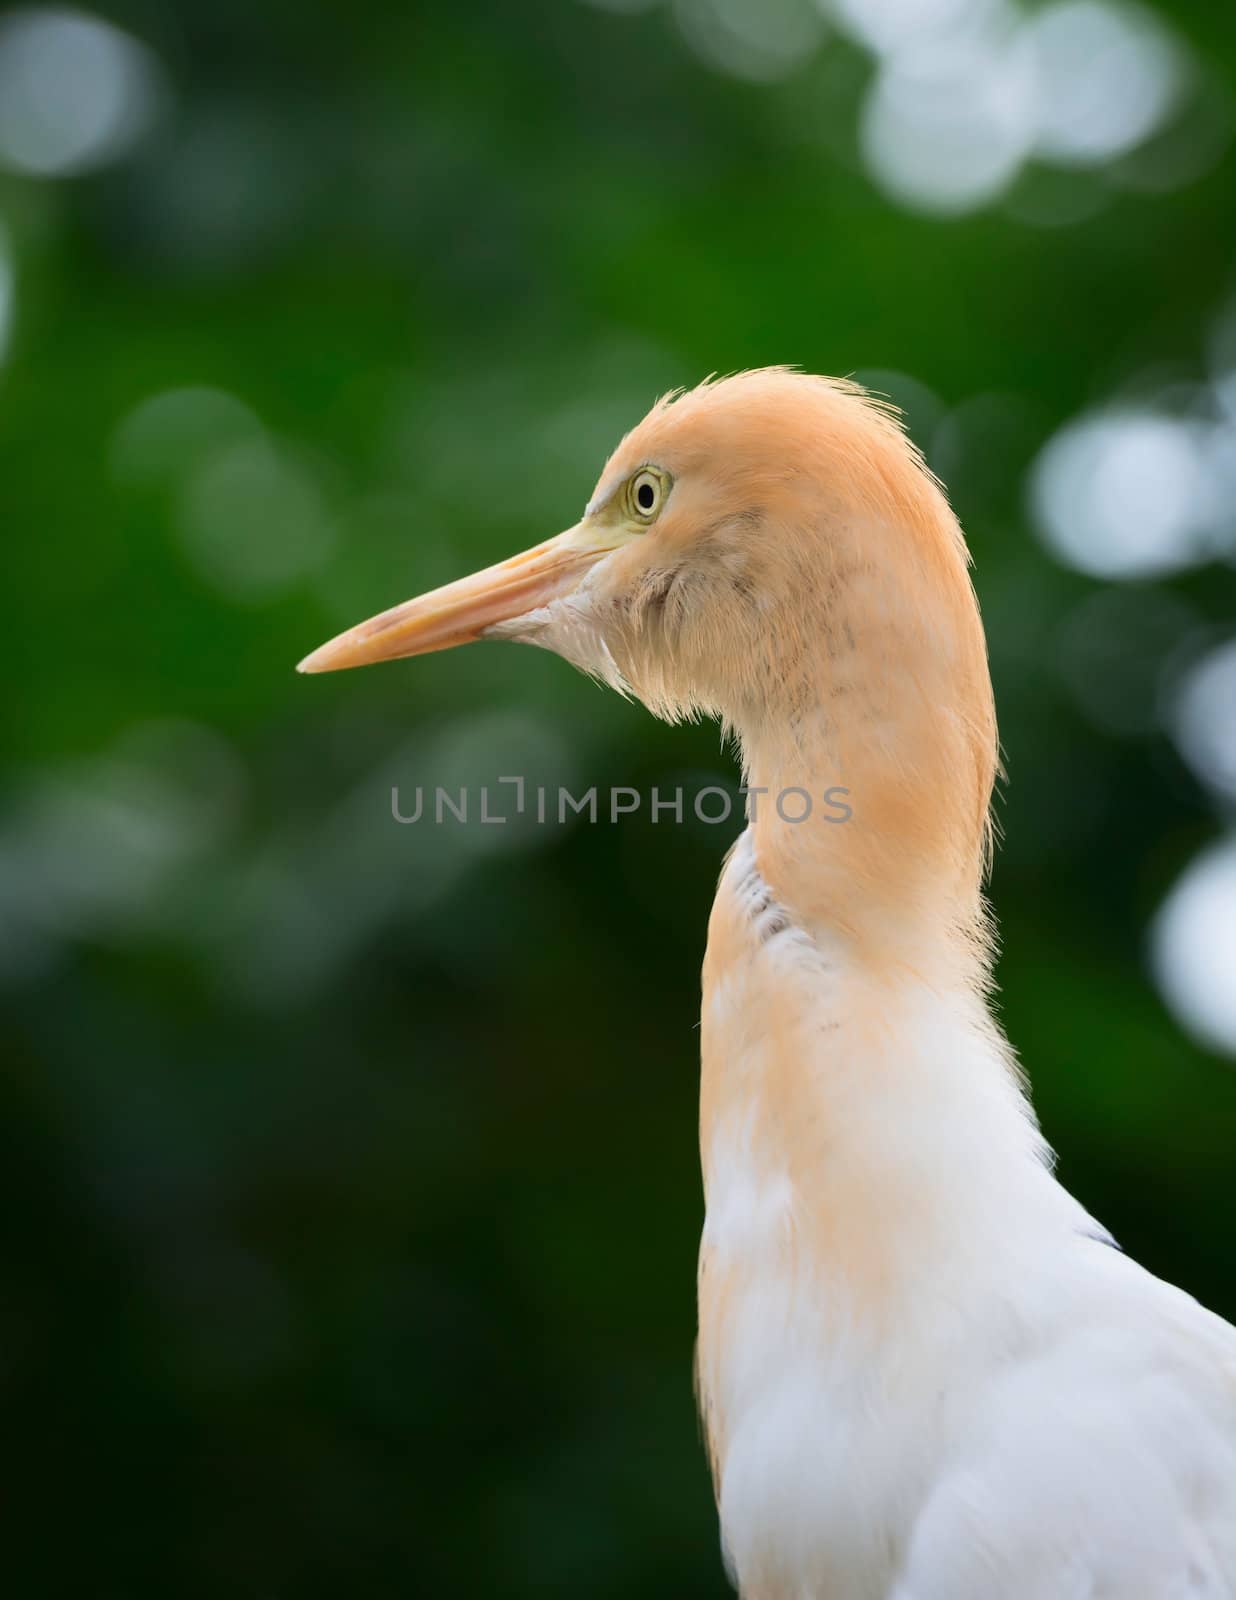 Cattle Egret (Bubulcus ibis) bird looking up with green trees on background